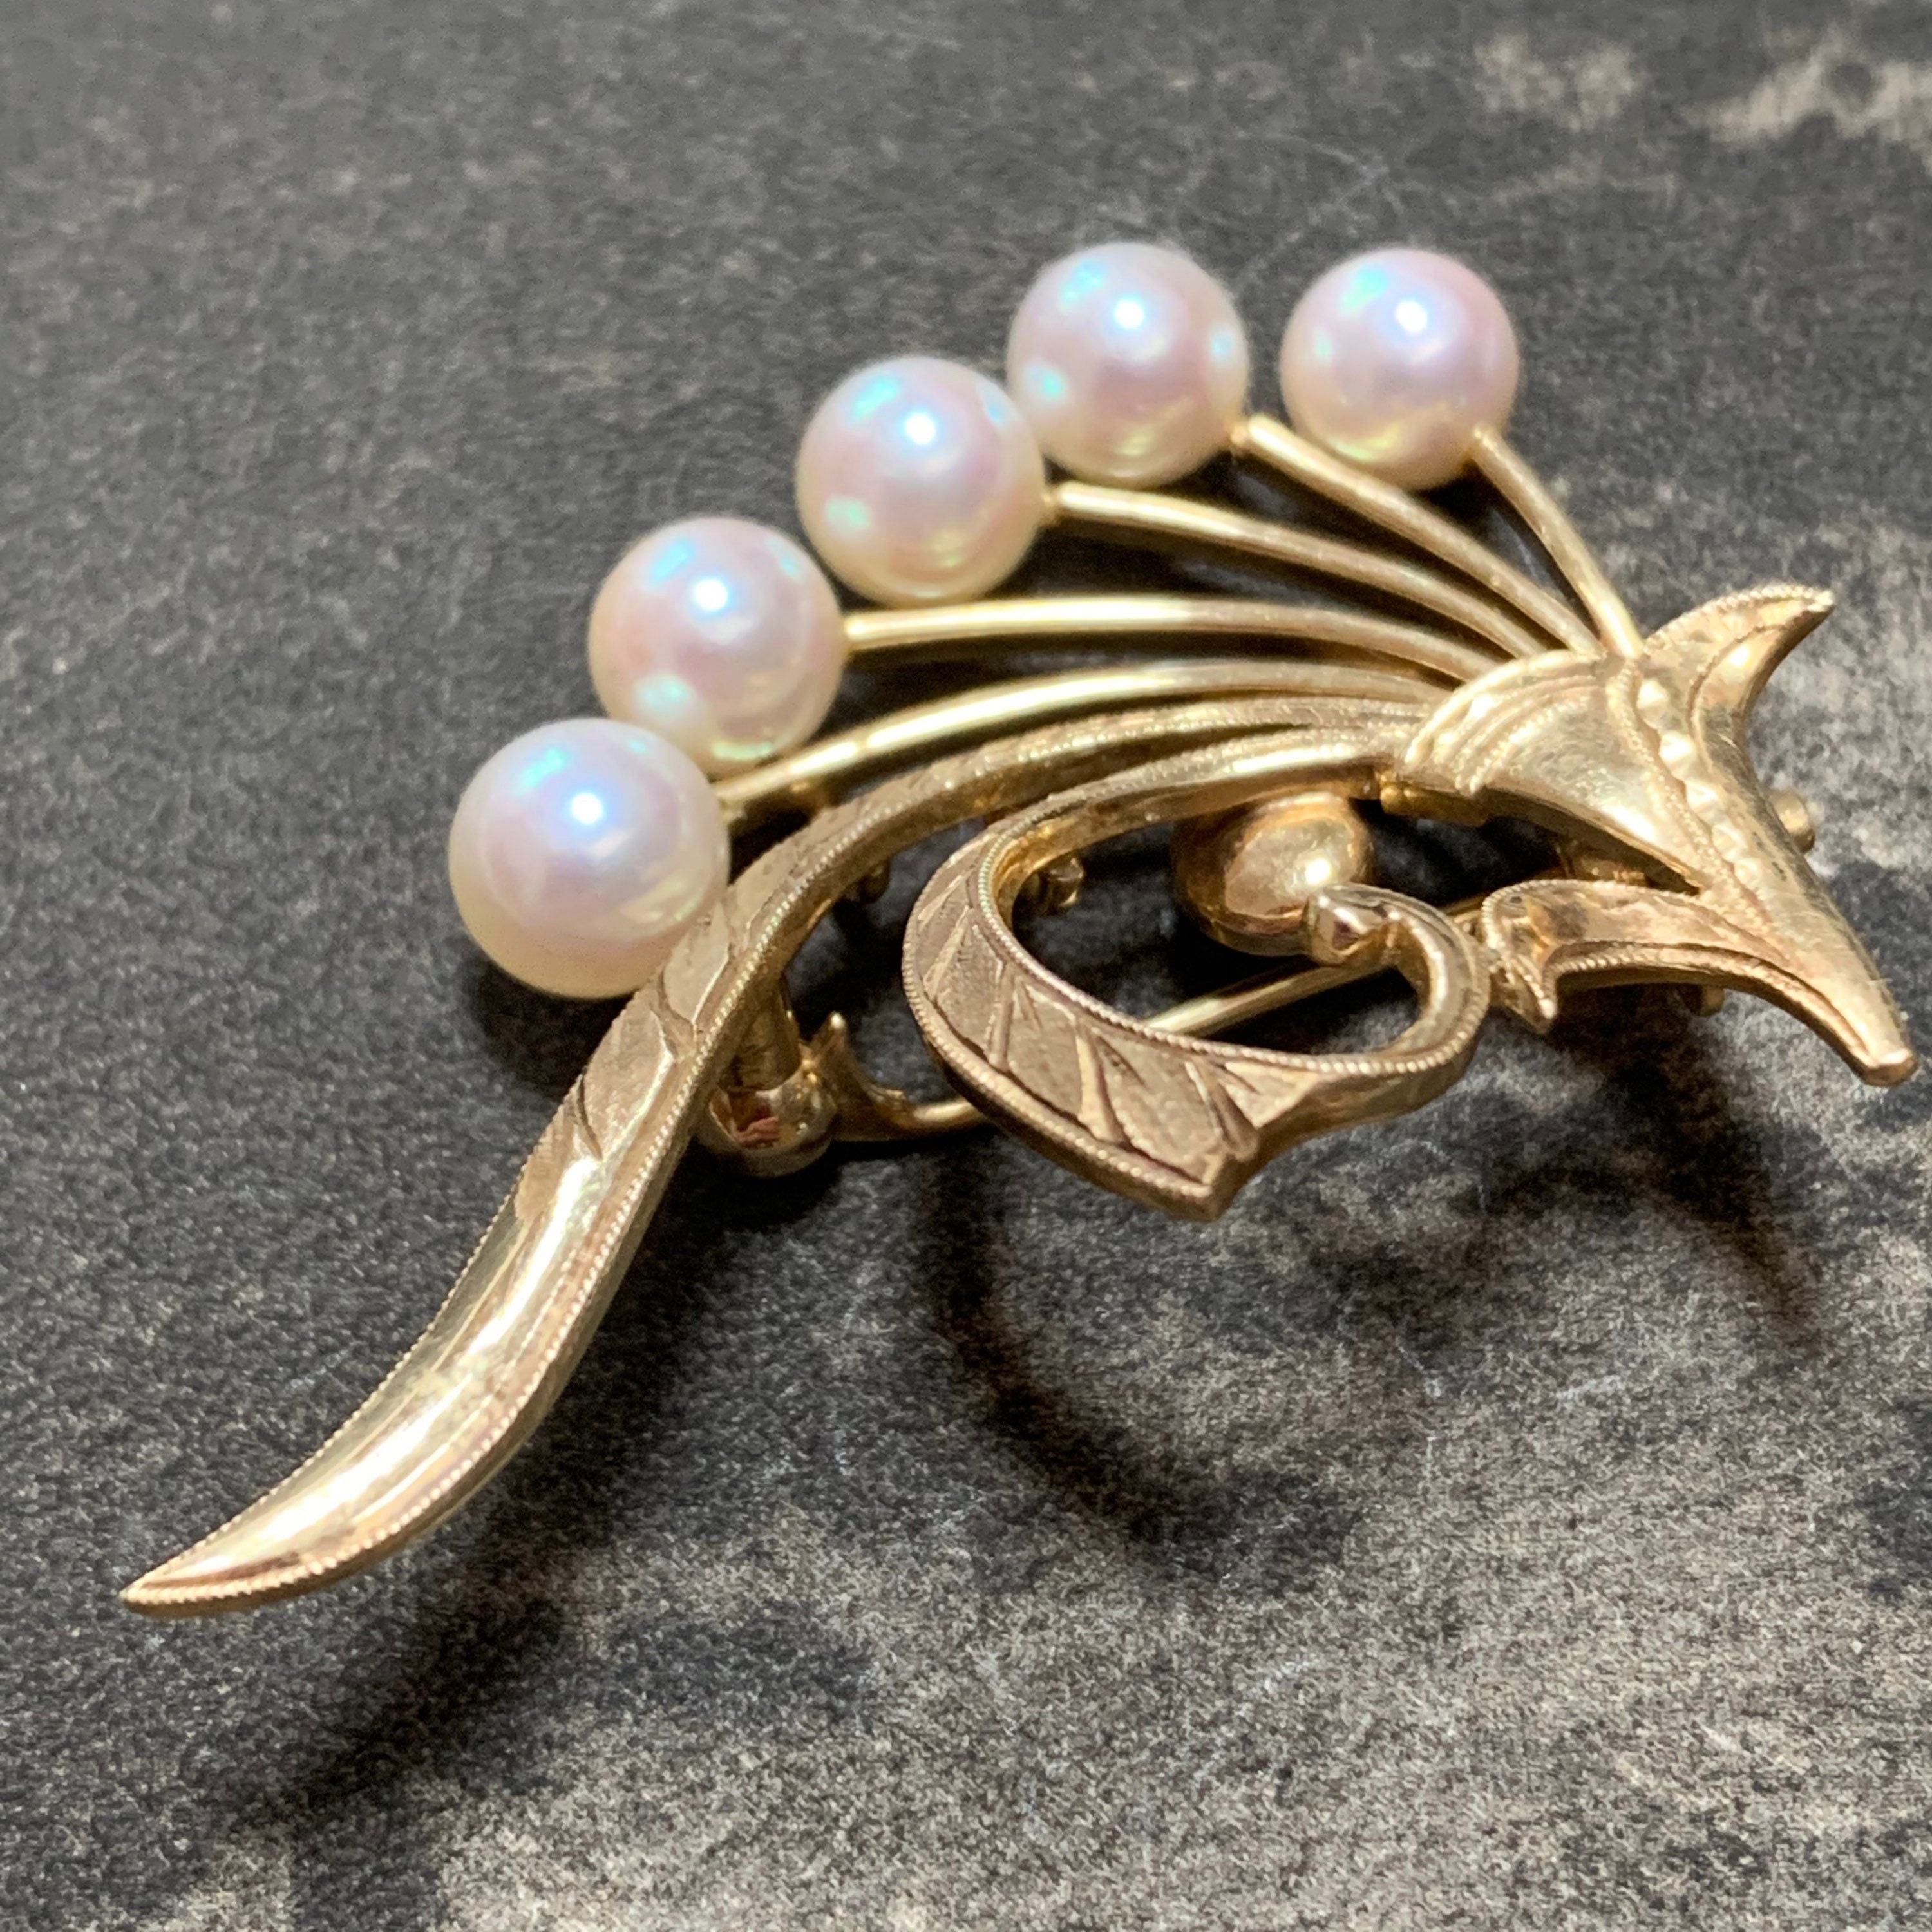 Vintage Mikimoto Brooch 14Ct Gold Set With 5 Japanese Akoya Pearls Of Outstanding Aaa Gem Quality. Designed As A Floral Spray